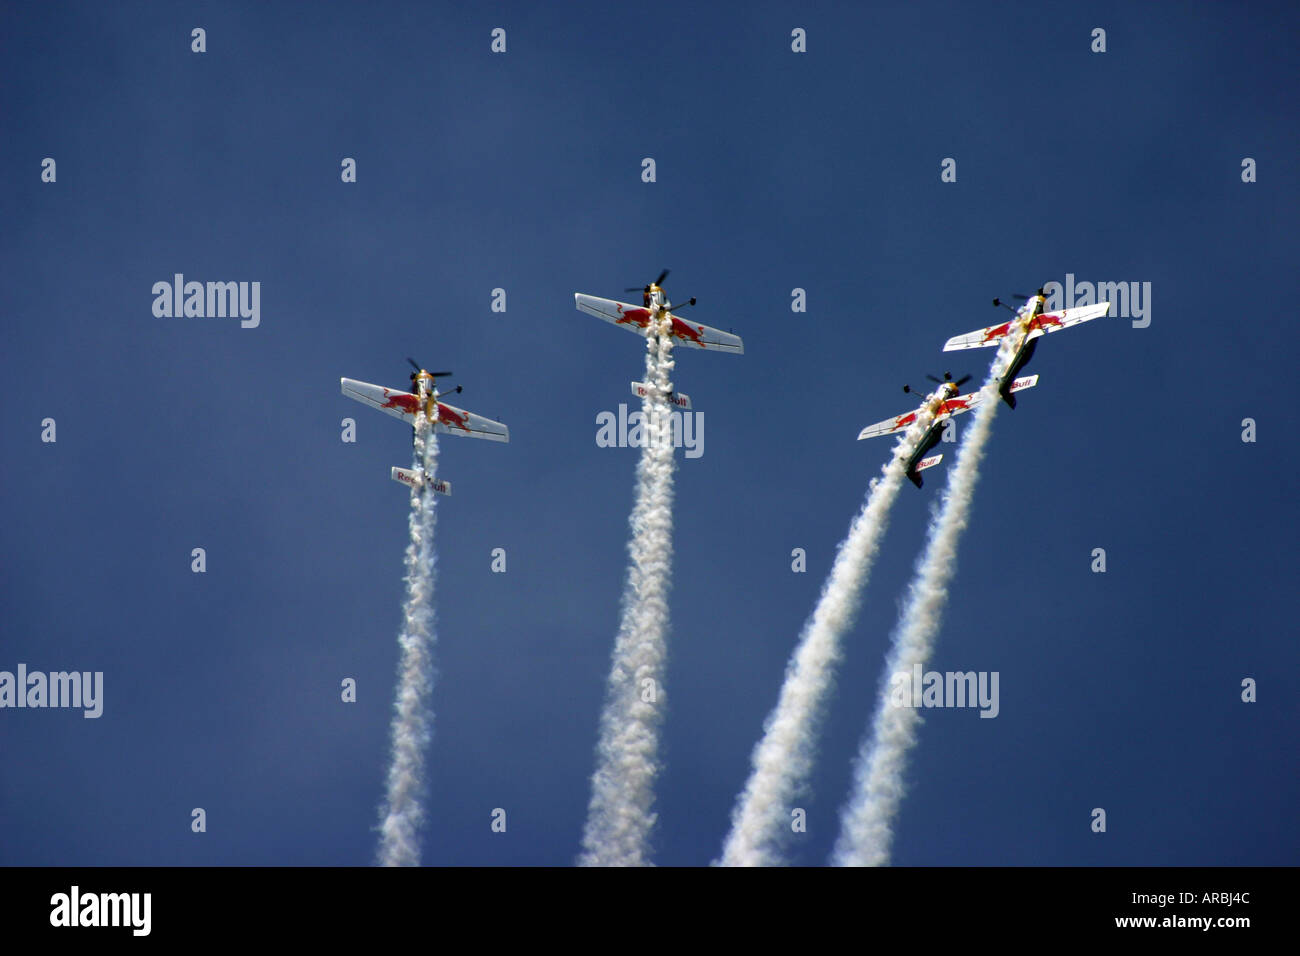 formation flight at a airshow Stock Photo